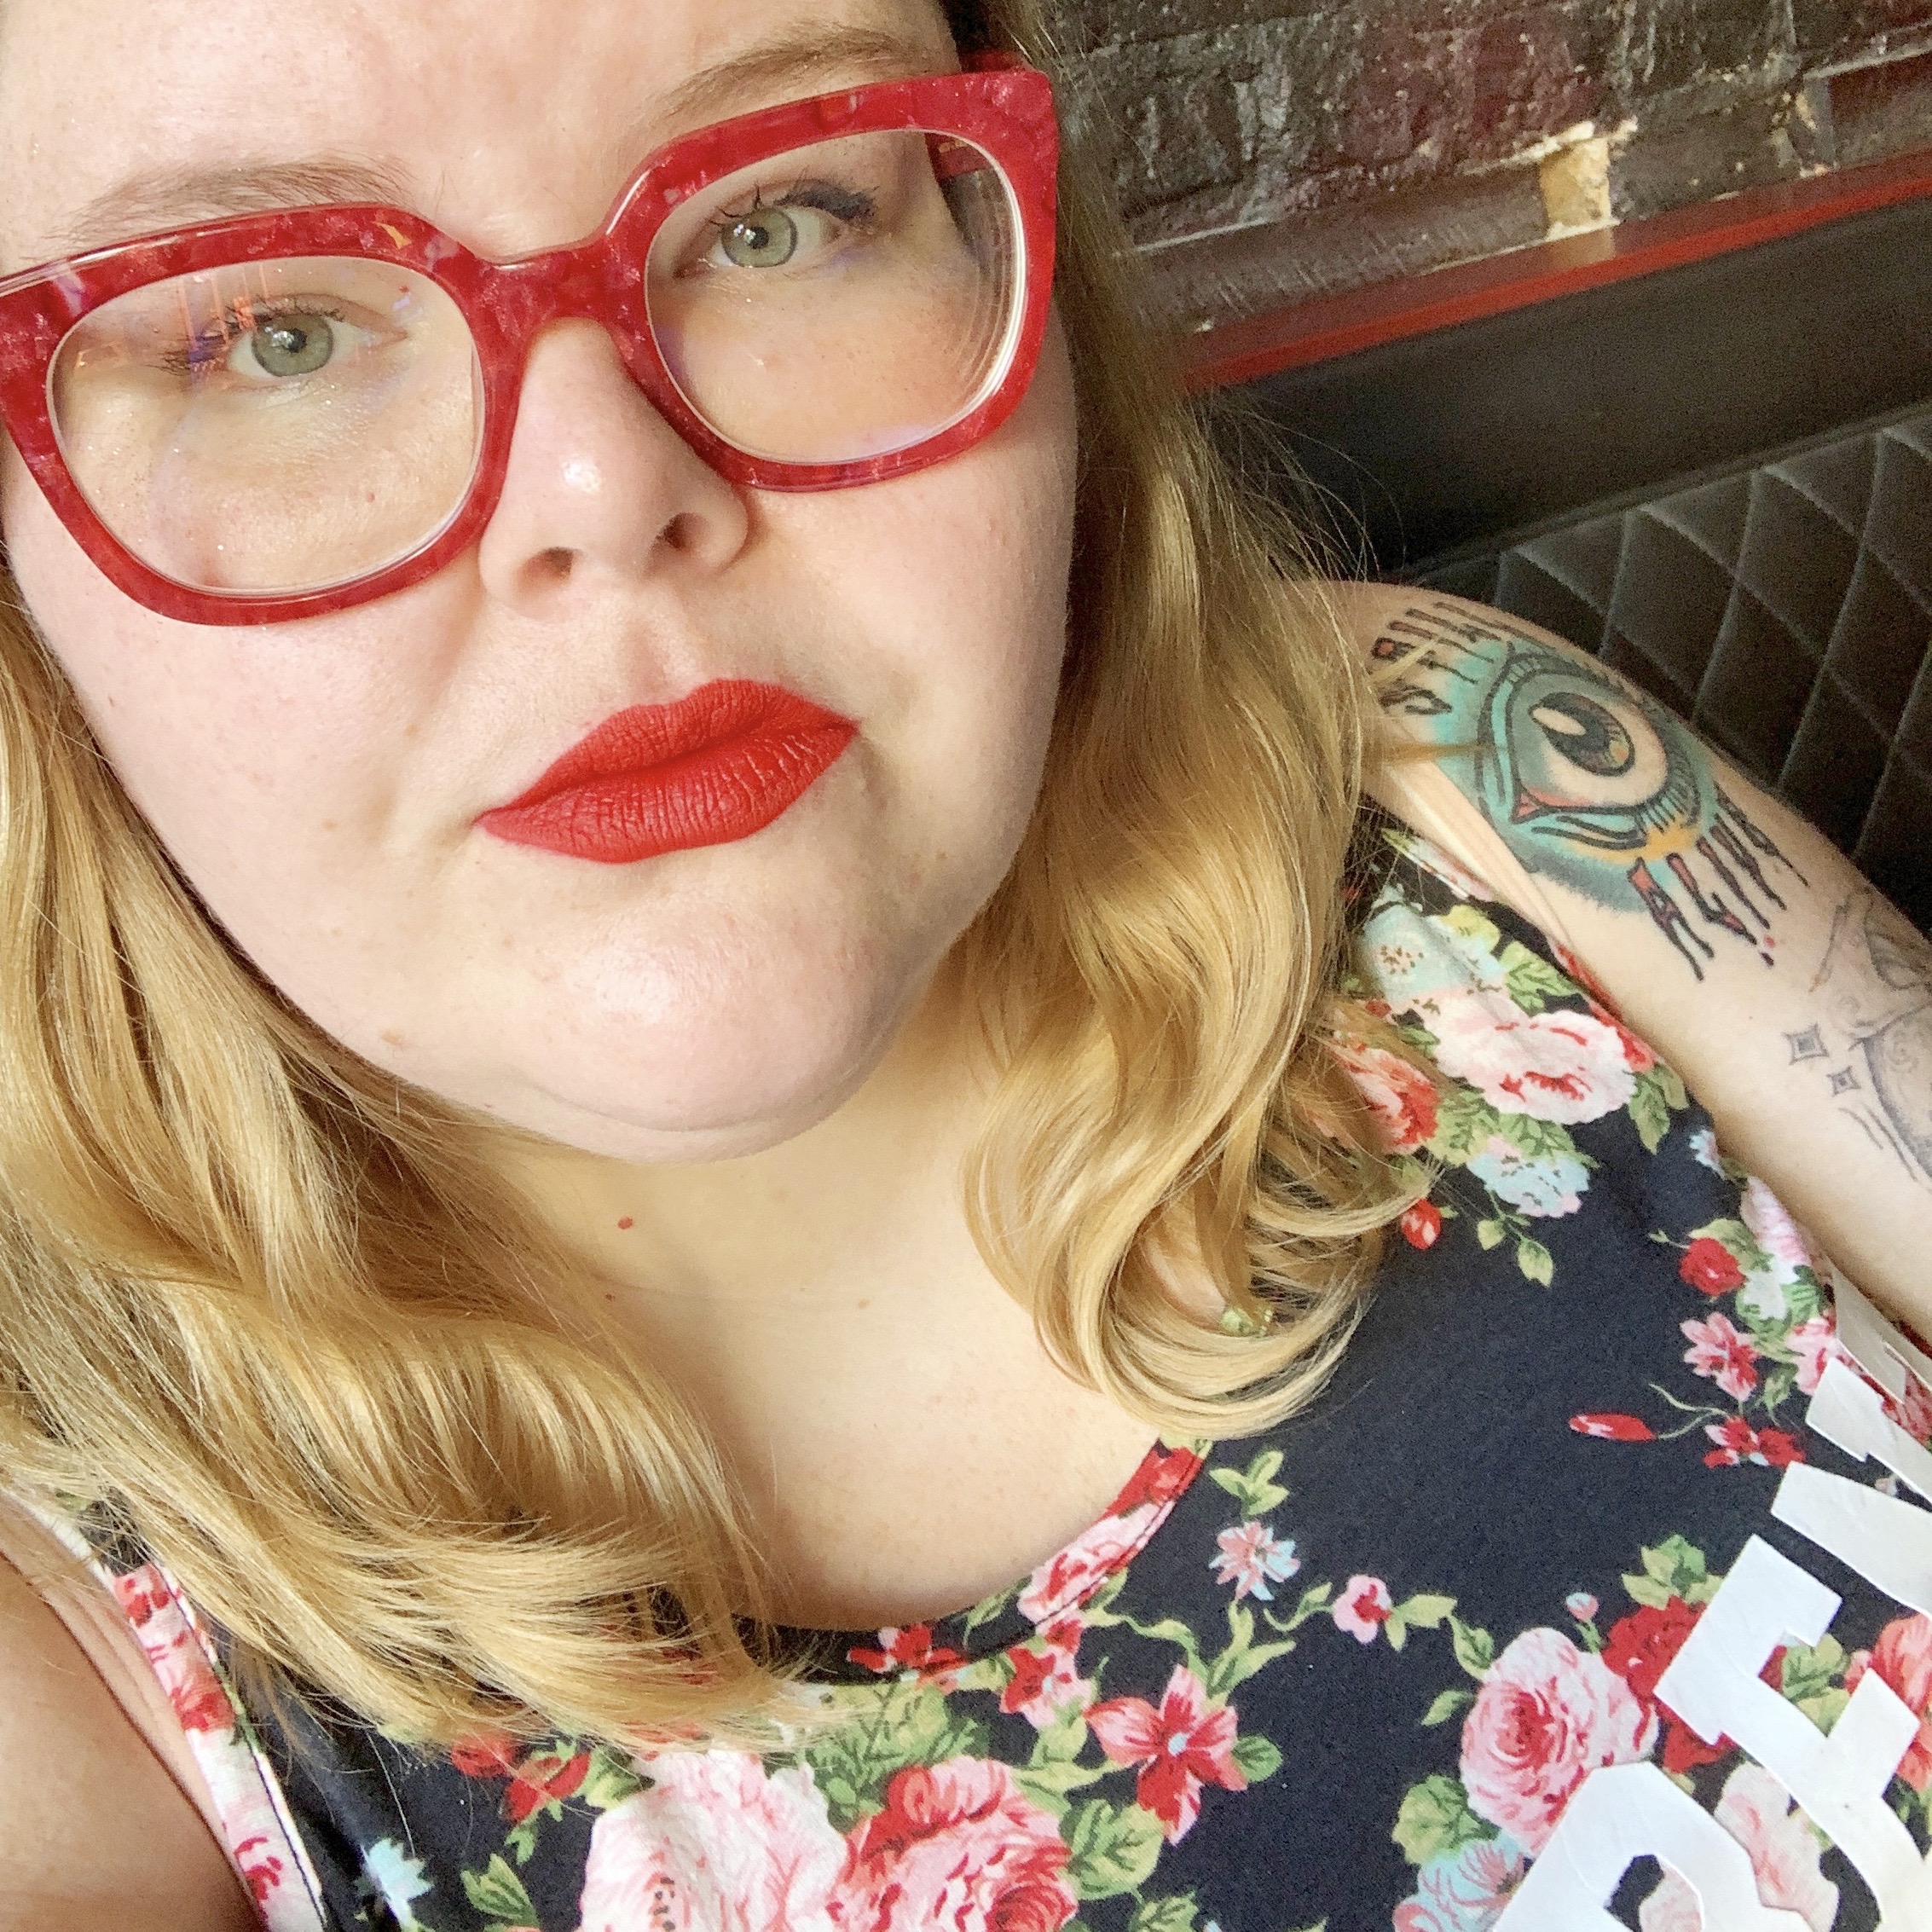 ash in red glasses and red lipstick and a floral top